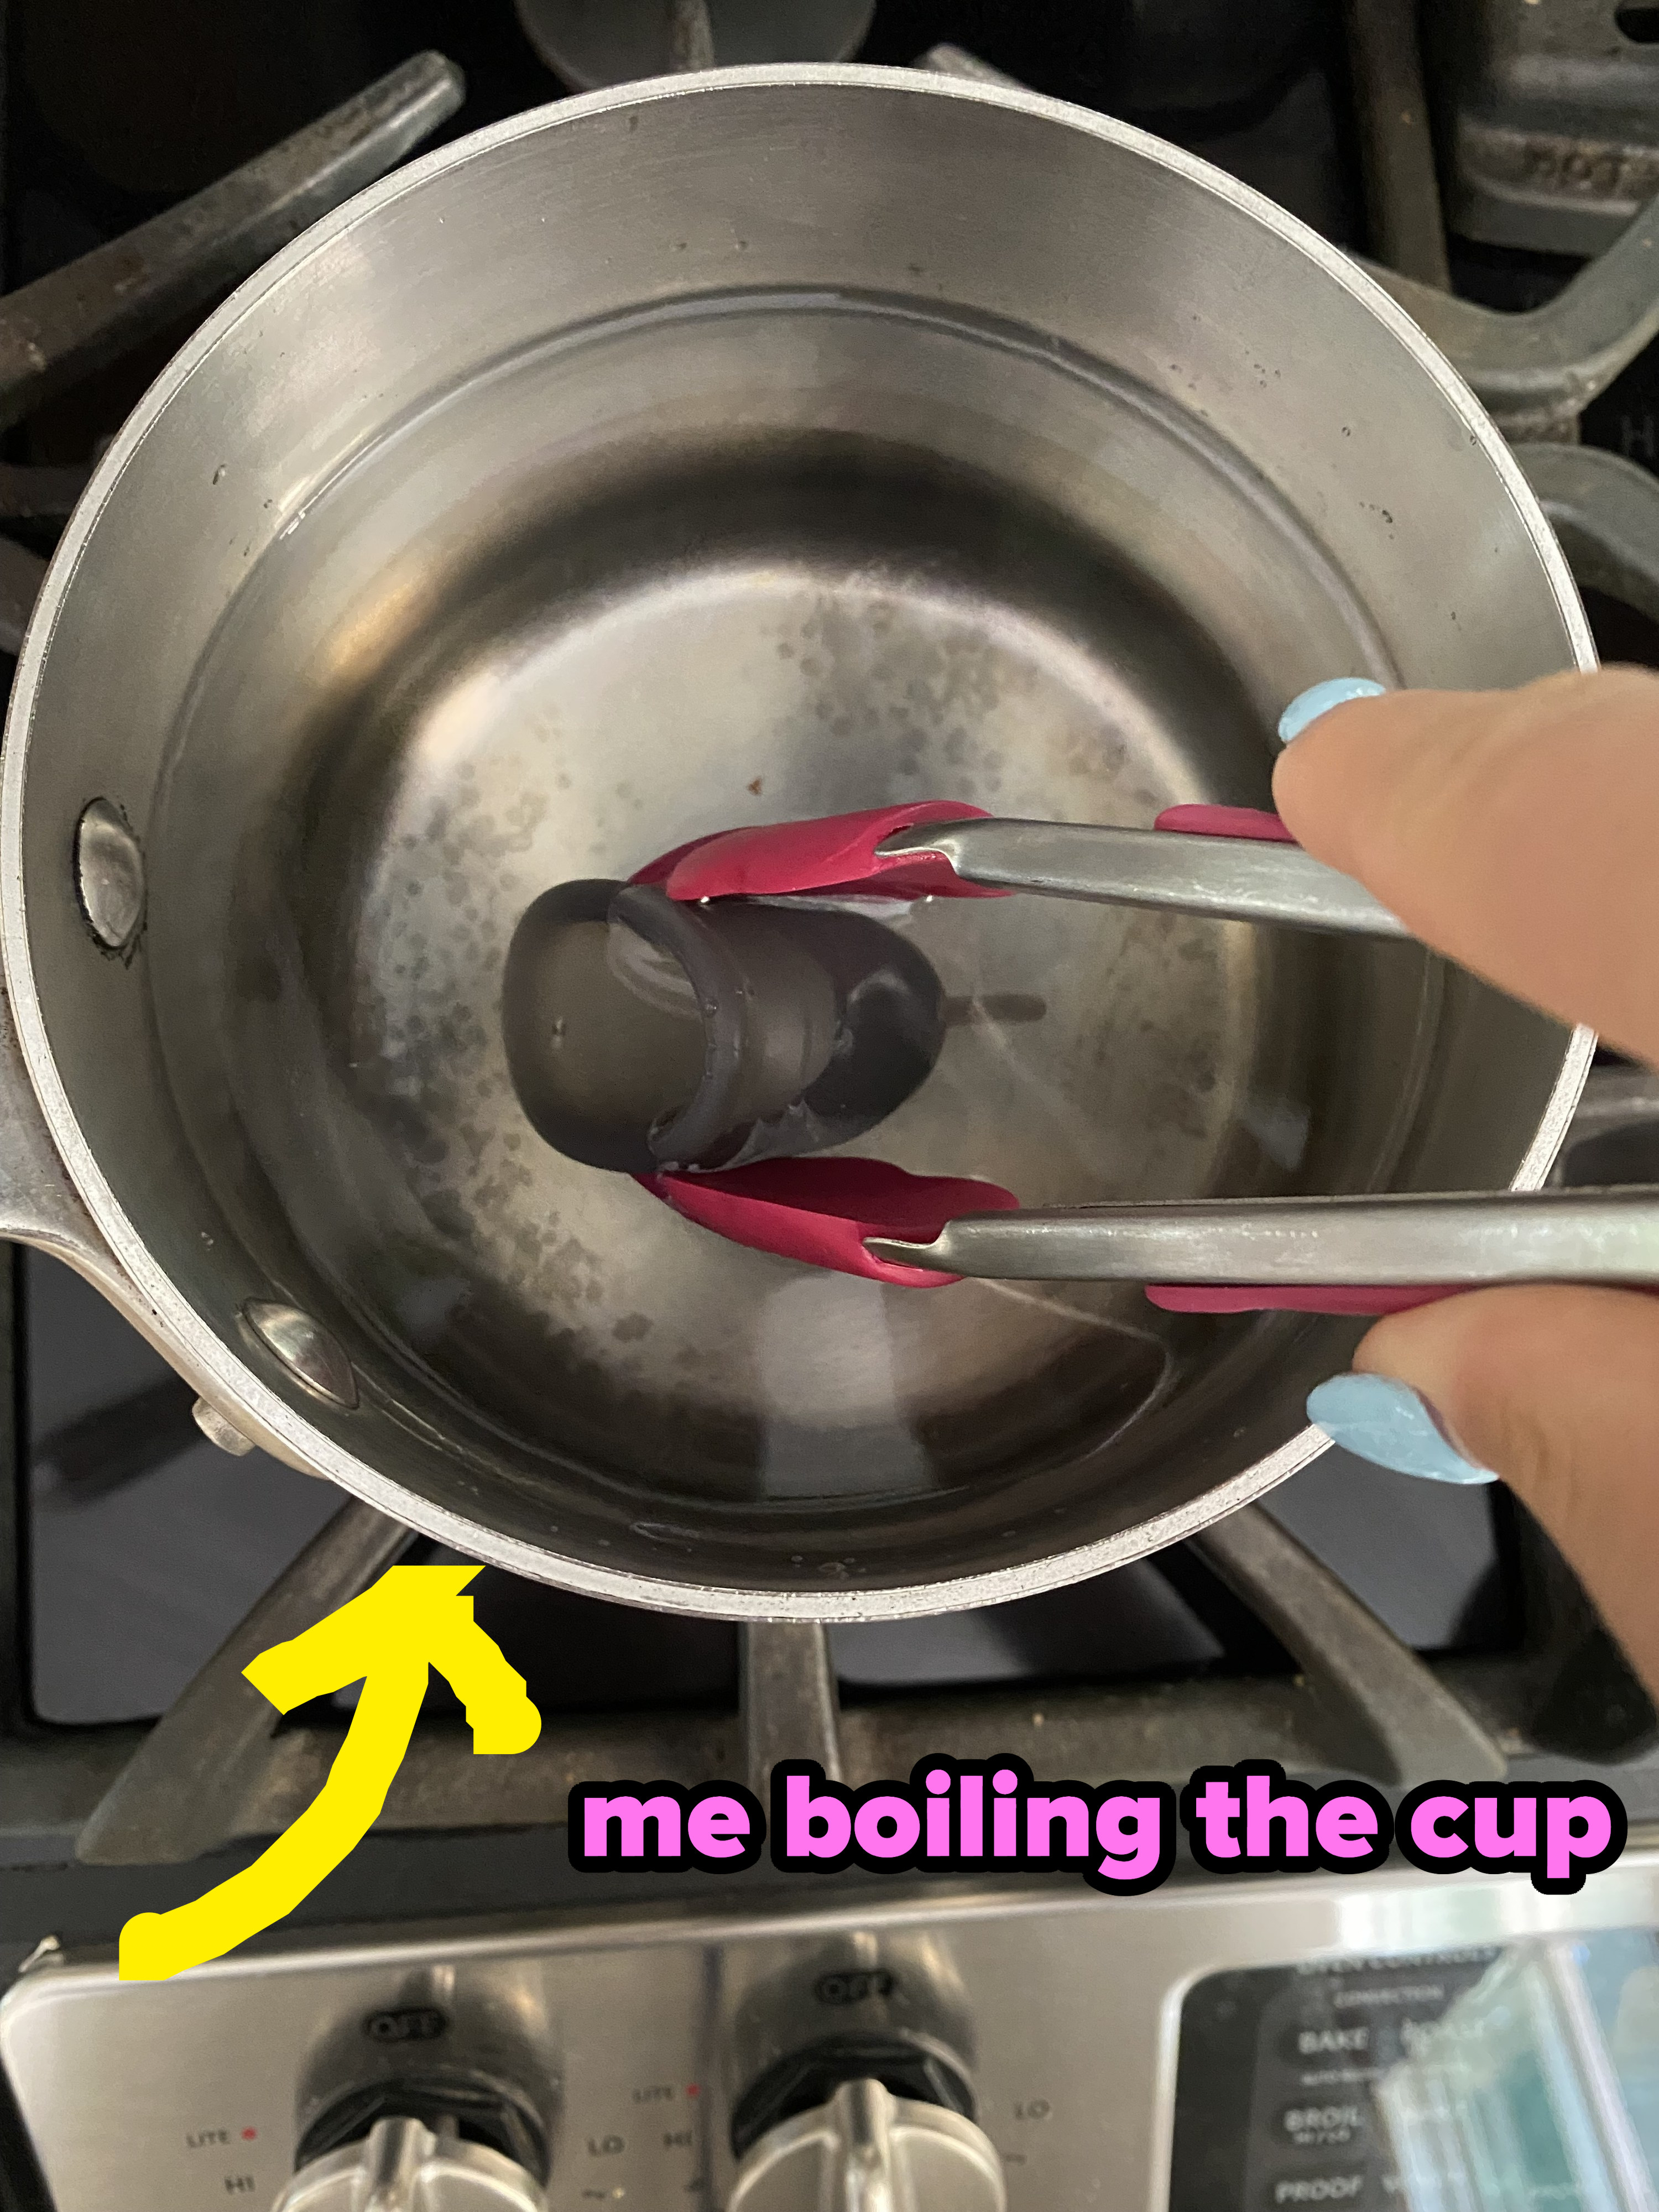 the author boiling the cup